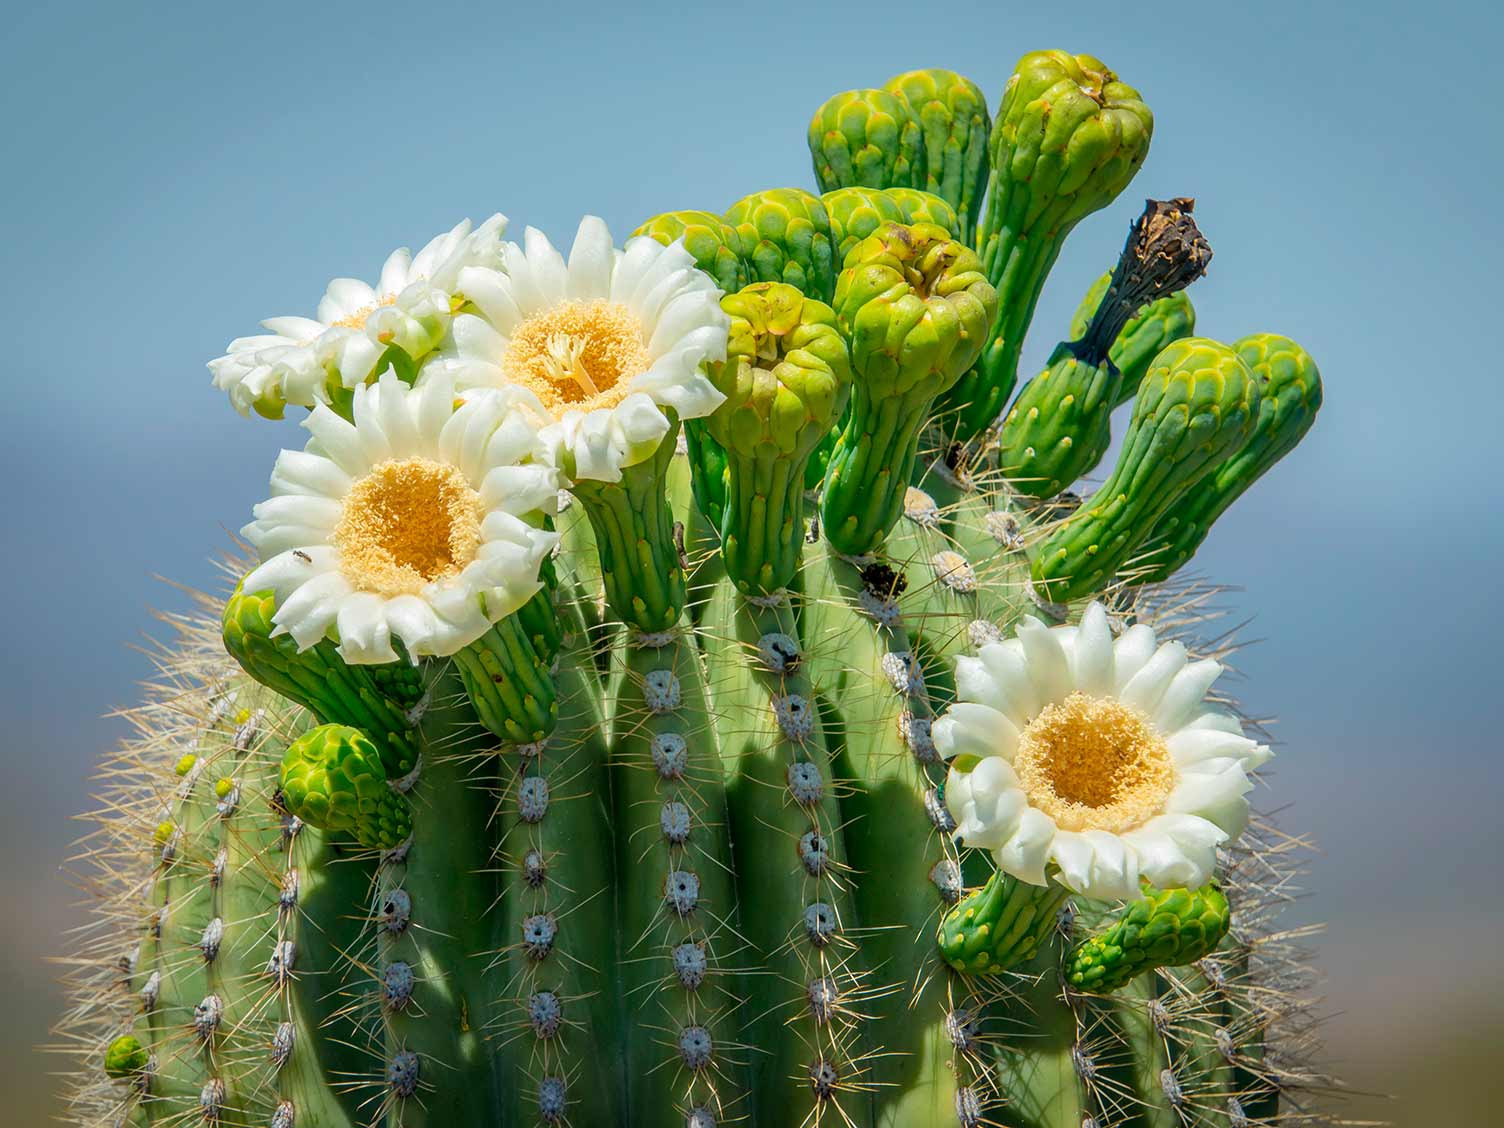 How To Grow And Care For Saguaro Cactus | Lovethegarden